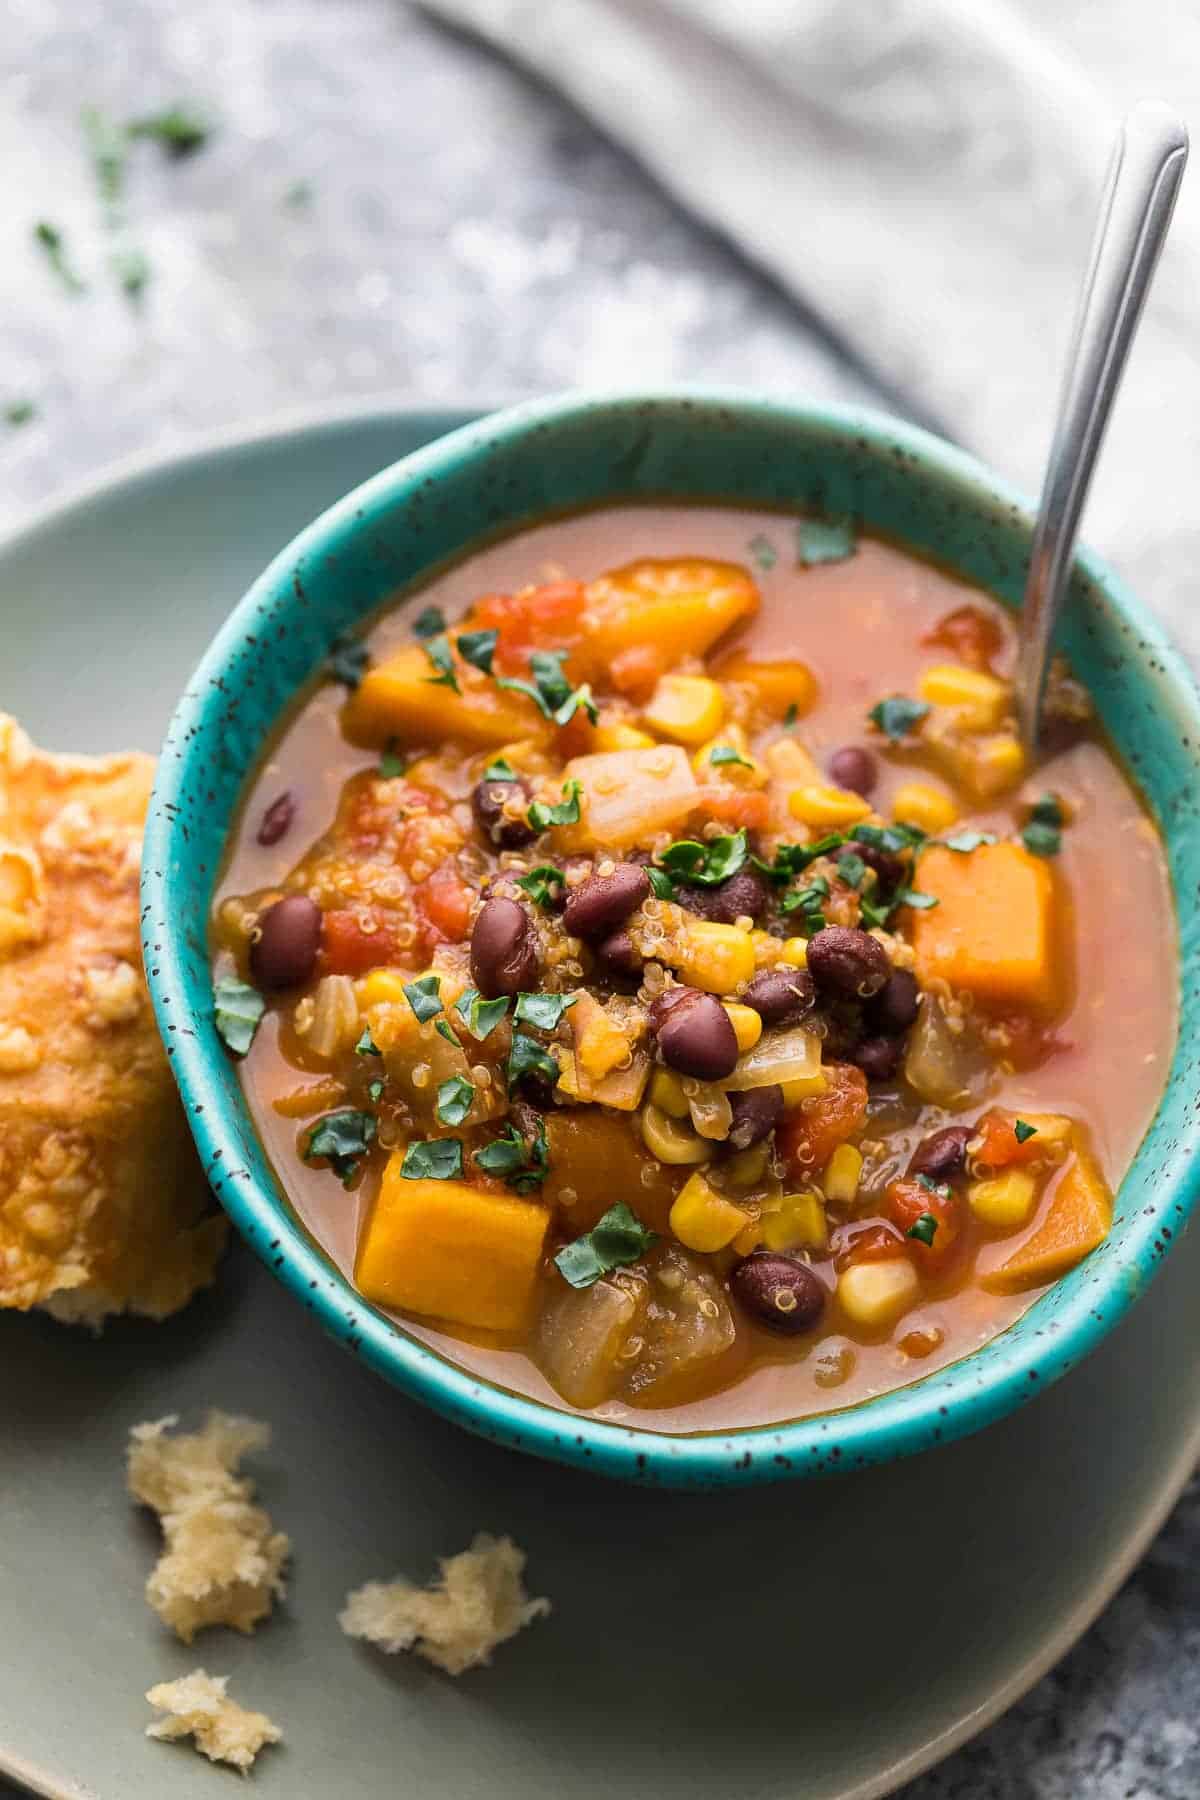 Black bean, quinoa and sweet potato stew in blue bowl with a chunk of bread next to it